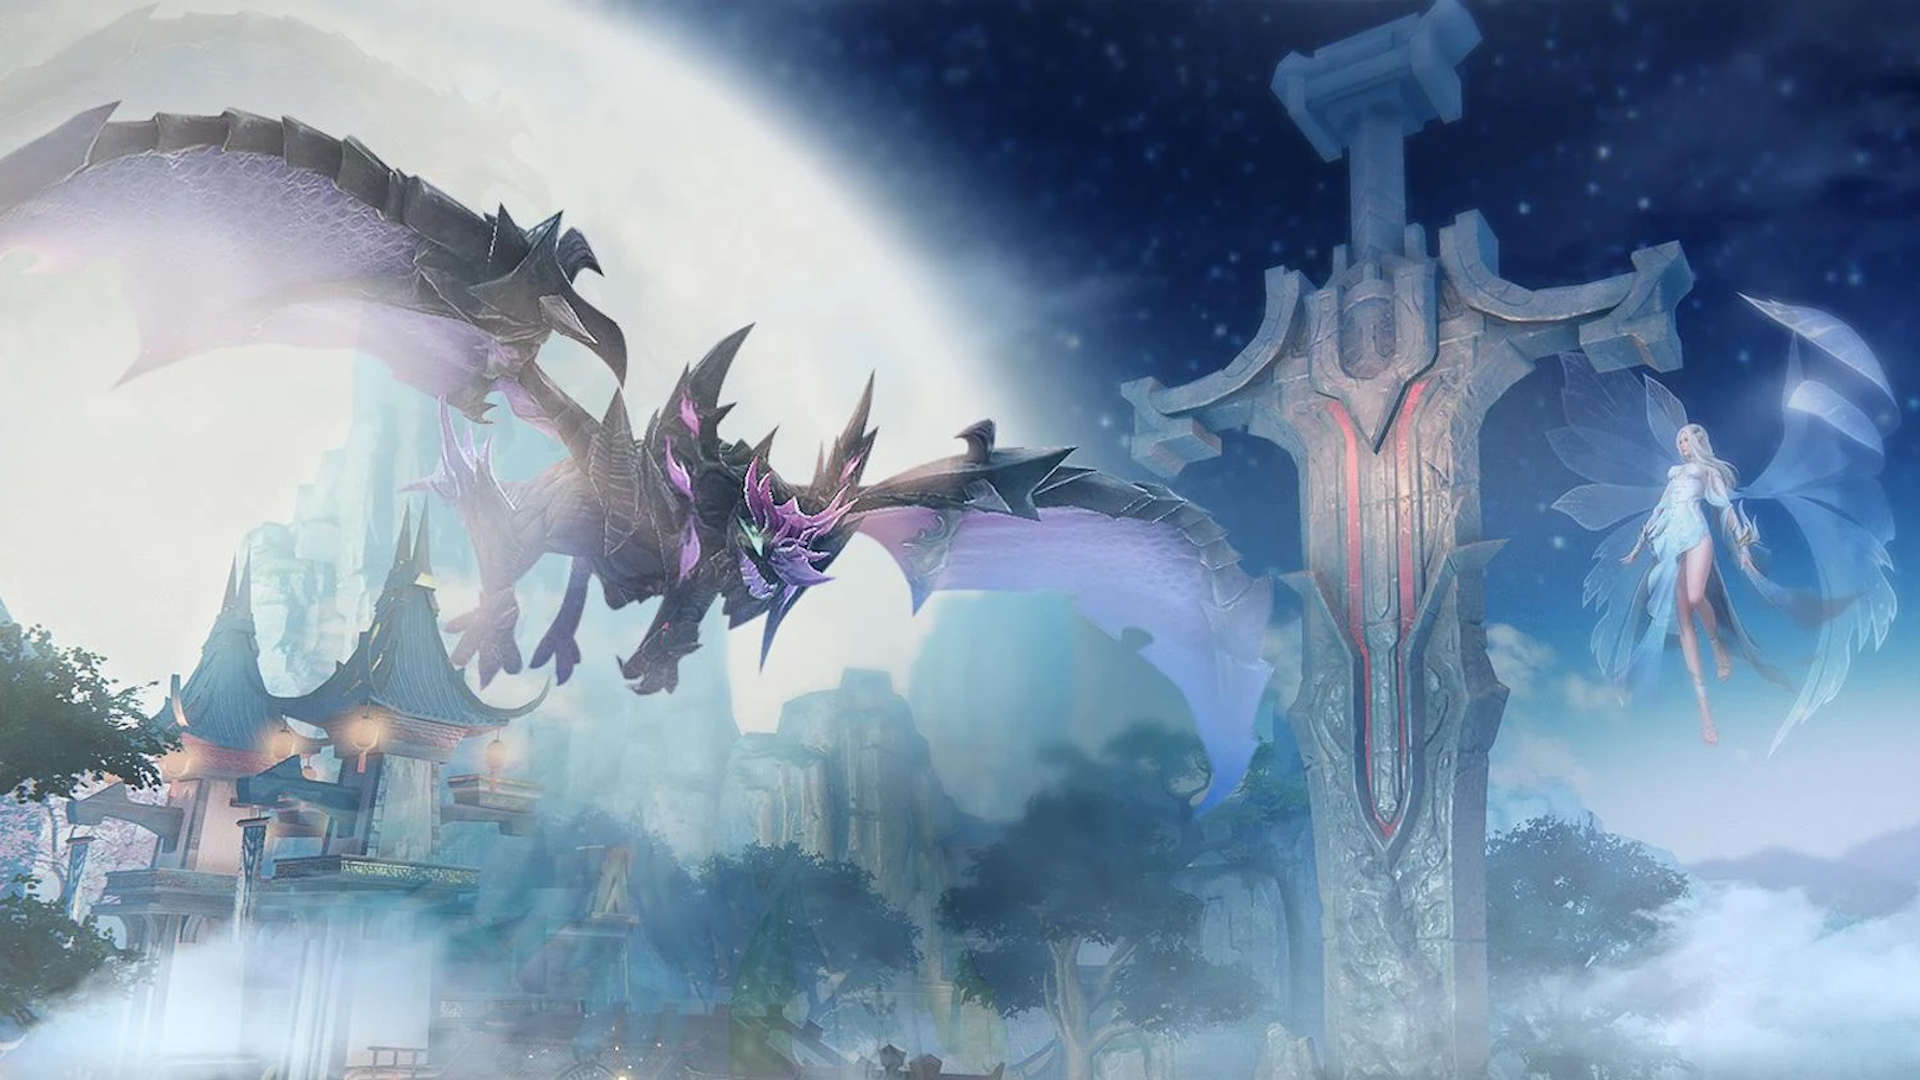 Best mobile MMORPGs: Perfect World Mobile. Image shows a dragon flying past a fantastical structure.